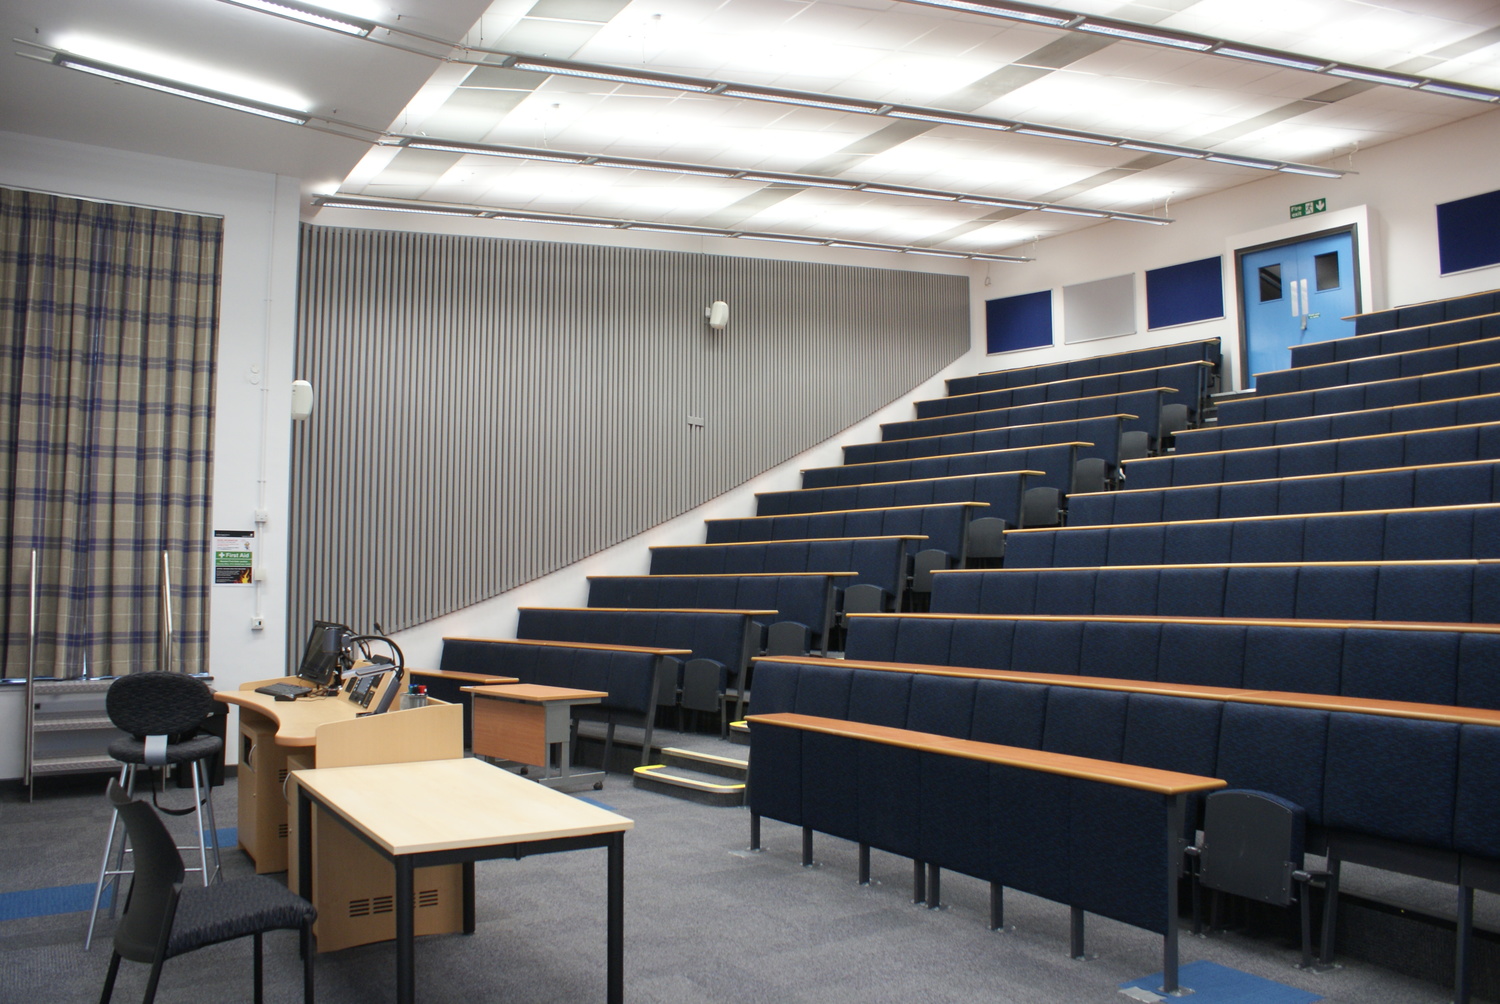  Crabtree Lecture Theatre, Mechanical Engineering - CTS 2015 